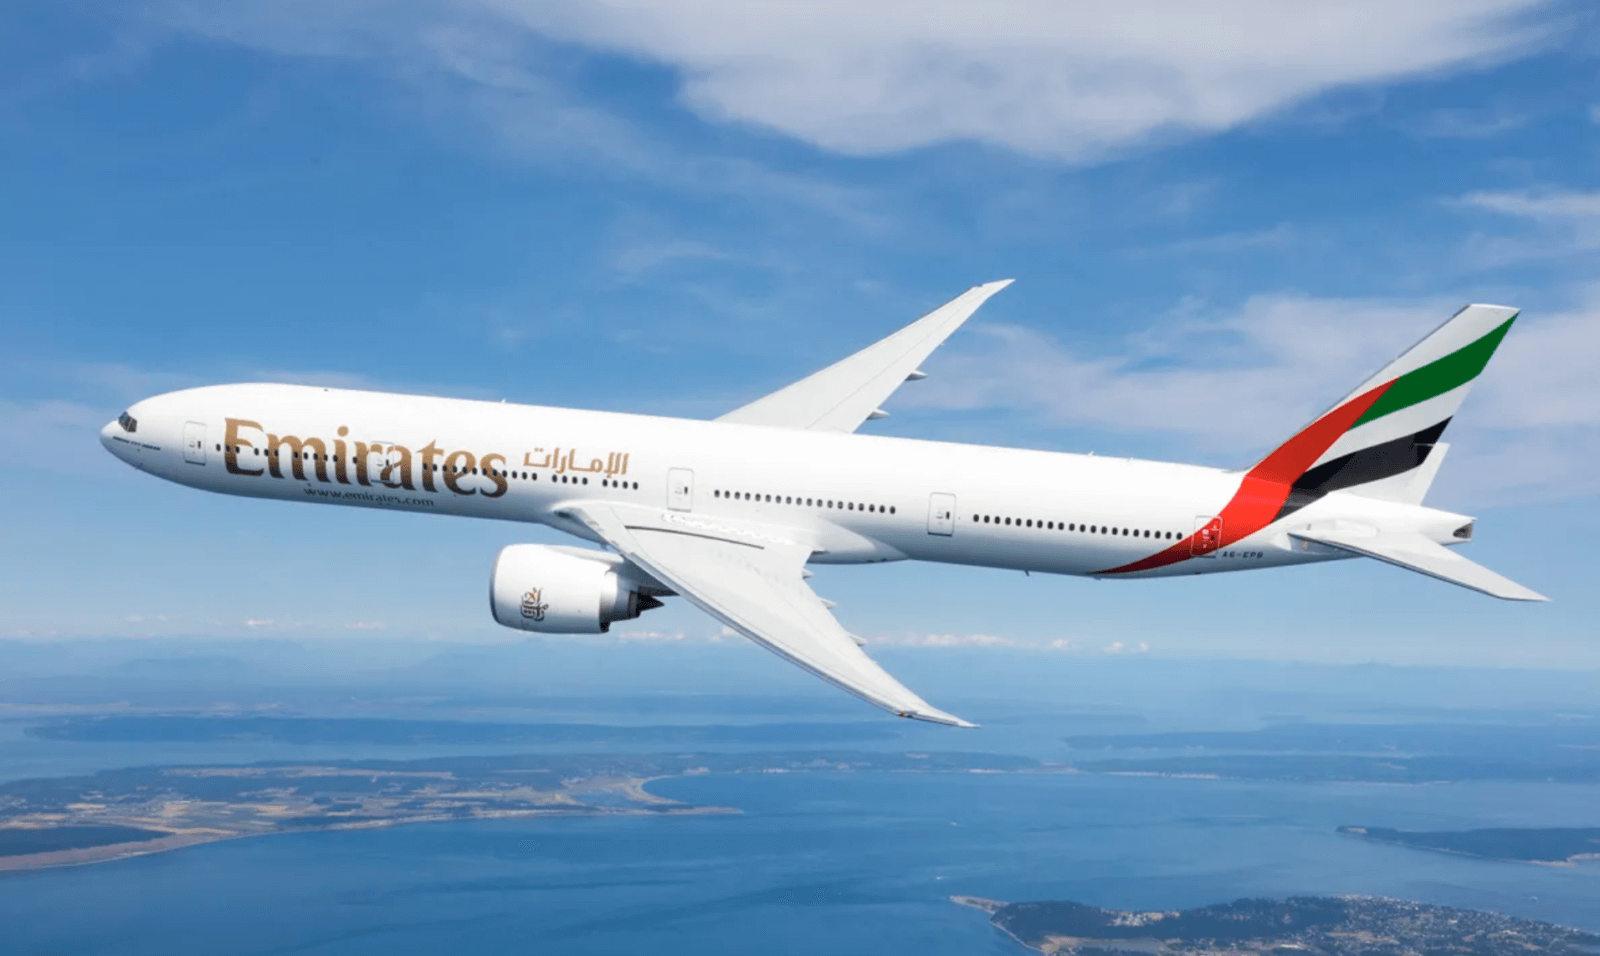 Emirates Airline Will Add Flights to 12 Destinations - Coming Soon in UAE